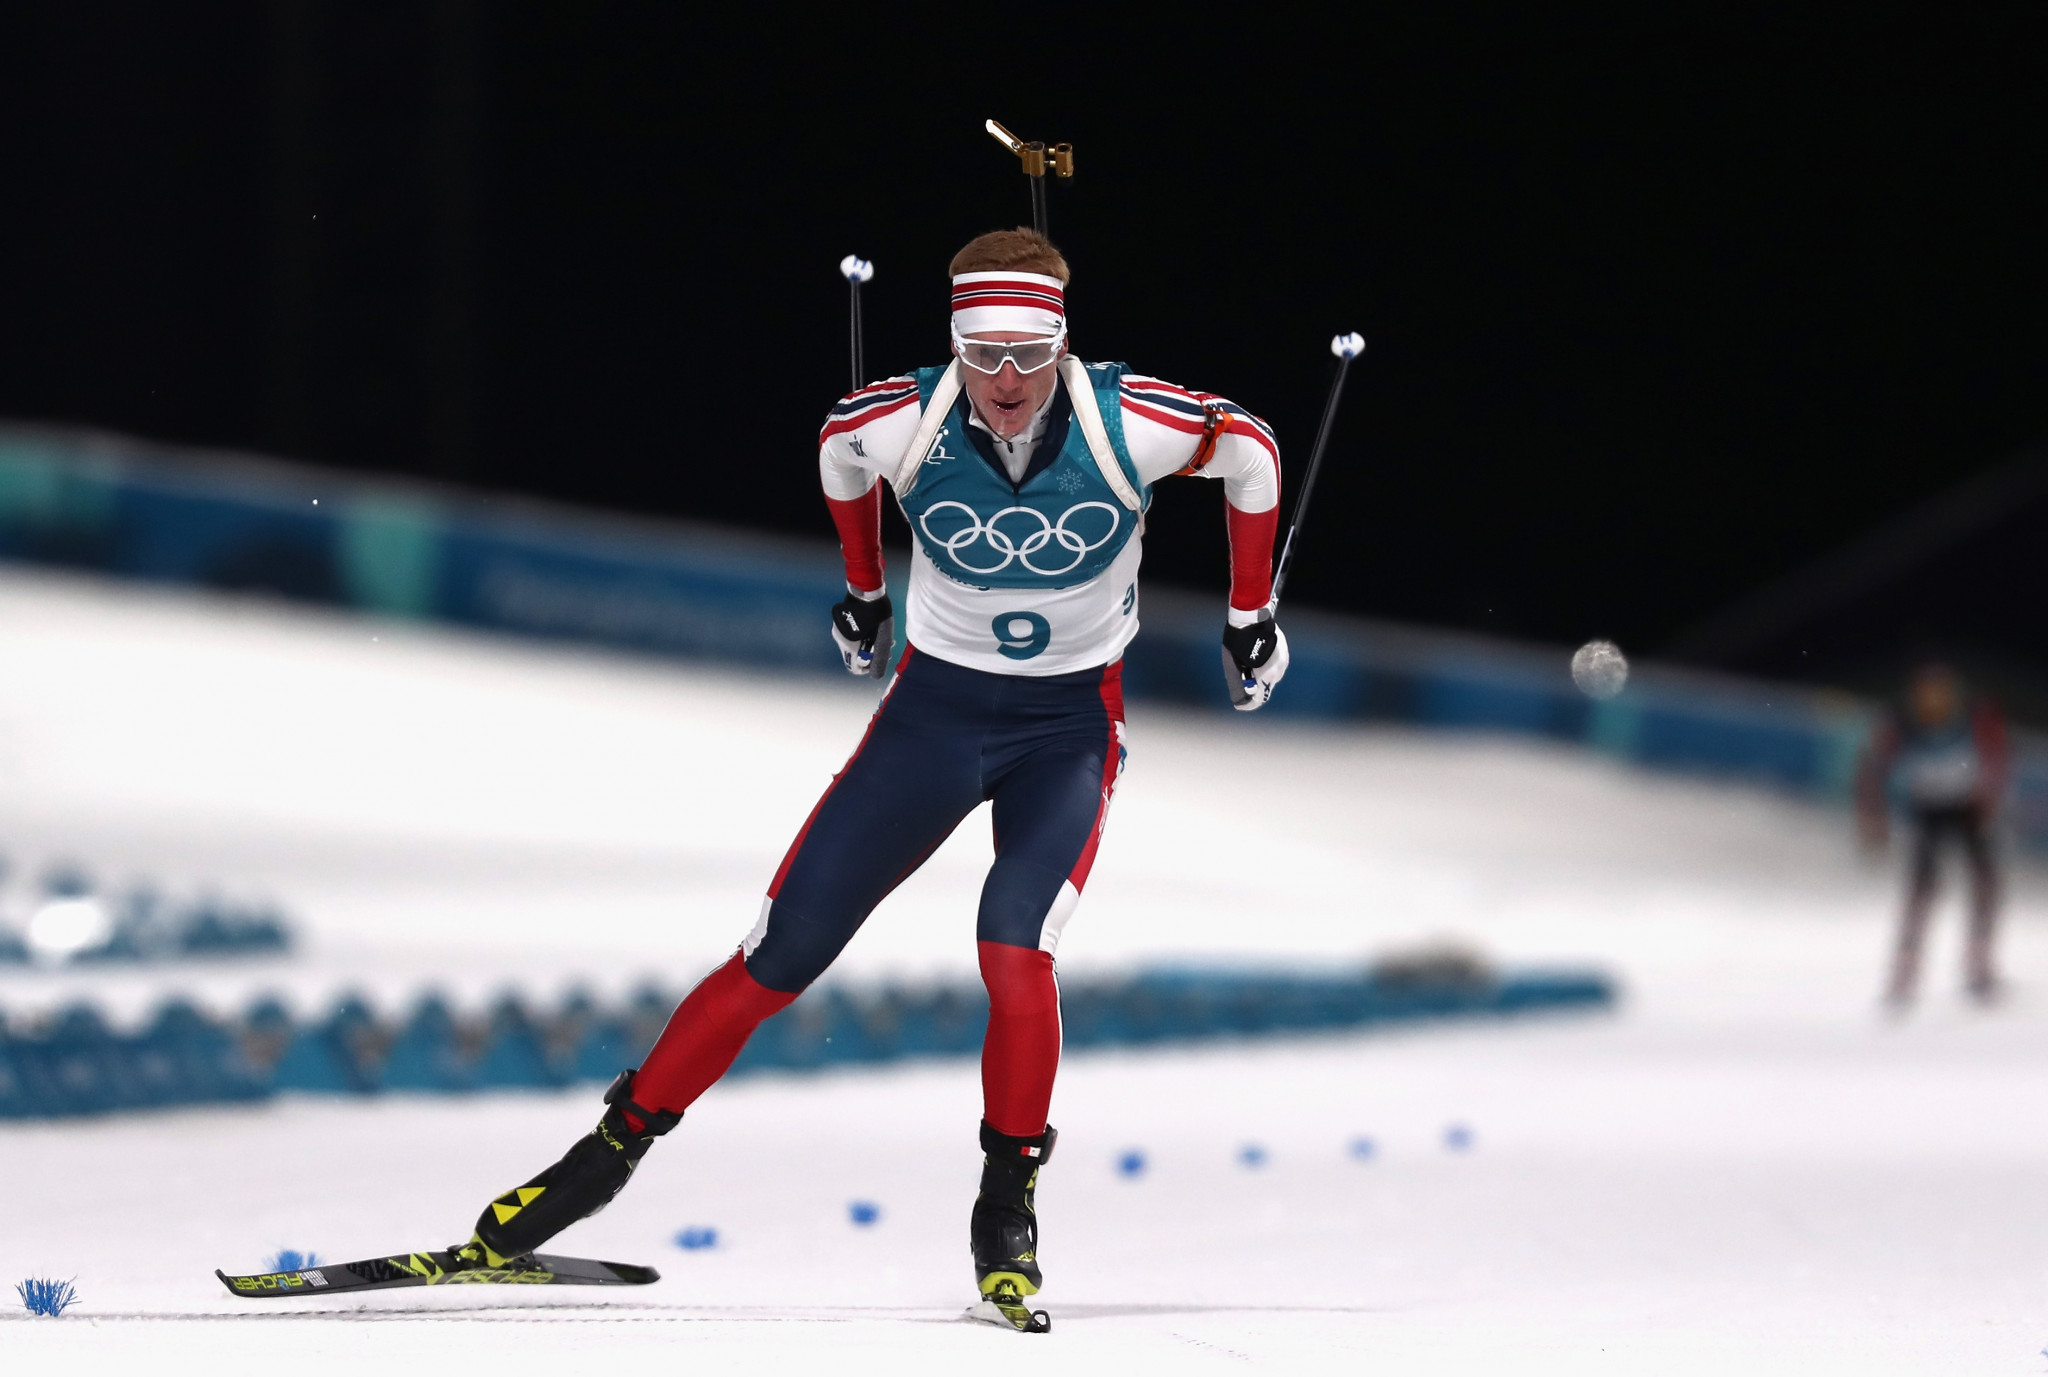 Johannes Thingnes Bø completed a golden day for Norway by winning the men's 20km individual biathlon race ©Getty Images